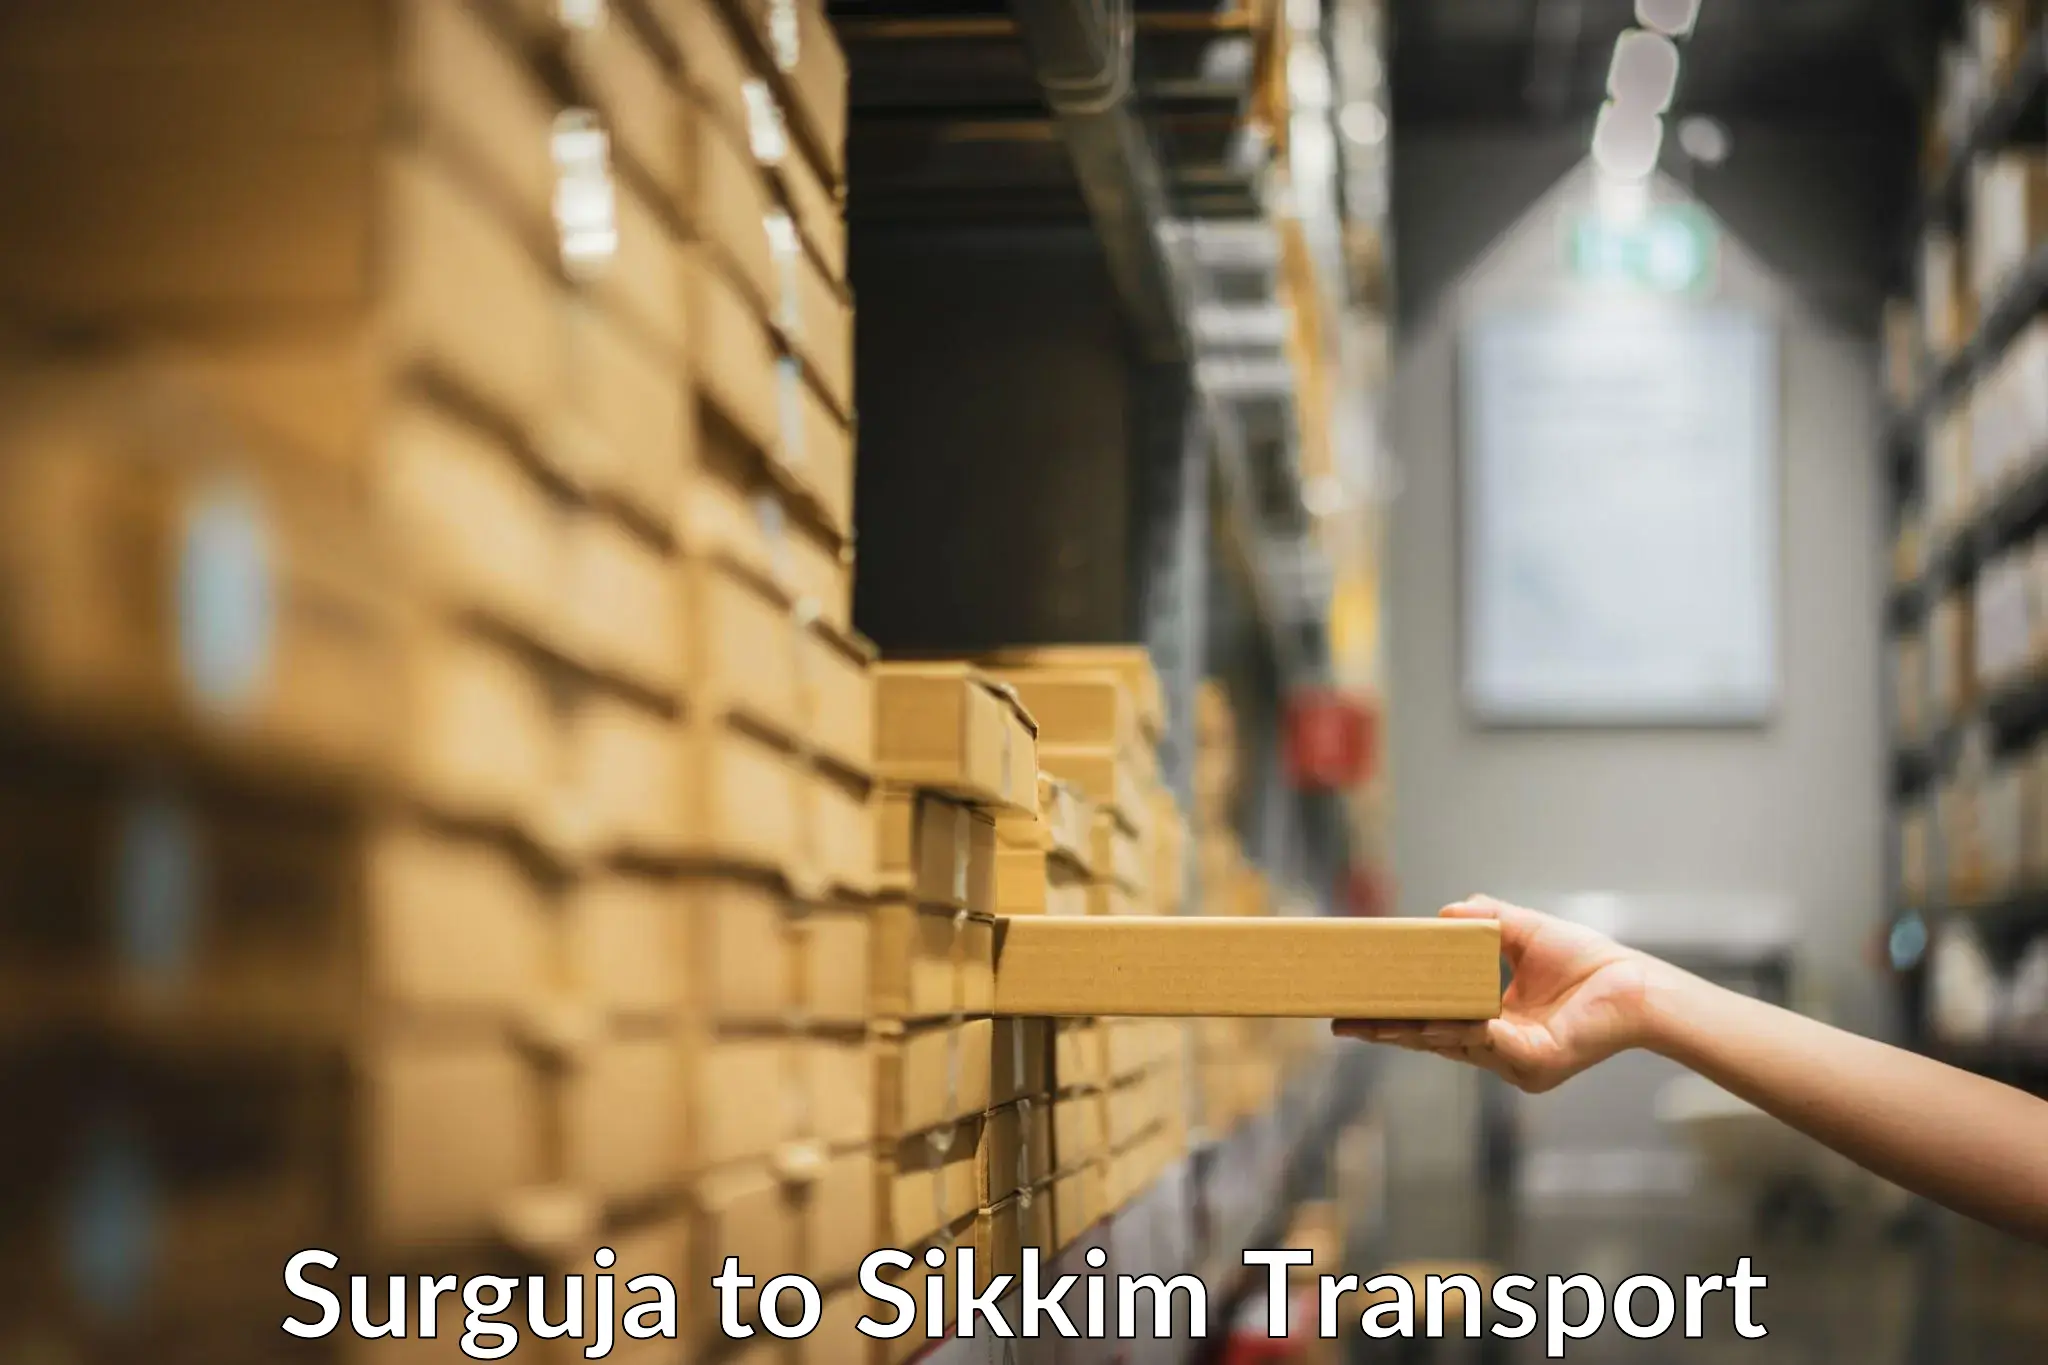 Pick up transport service Surguja to South Sikkim